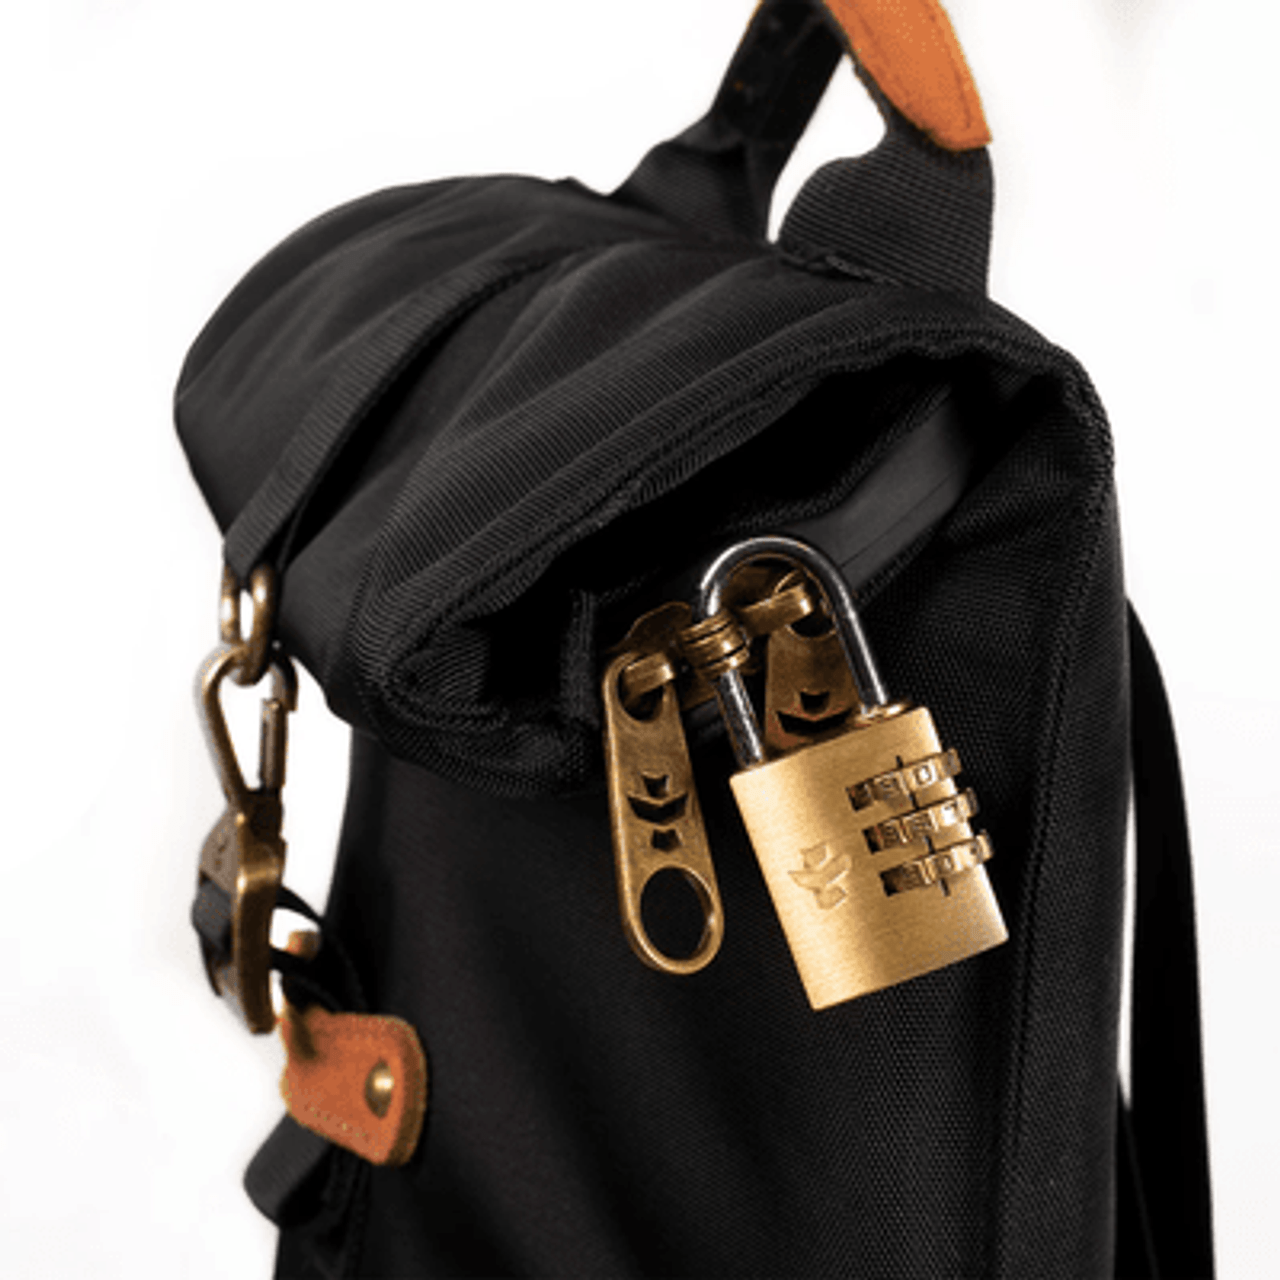 Black Smell Proof Backpack With Lock, High Quality